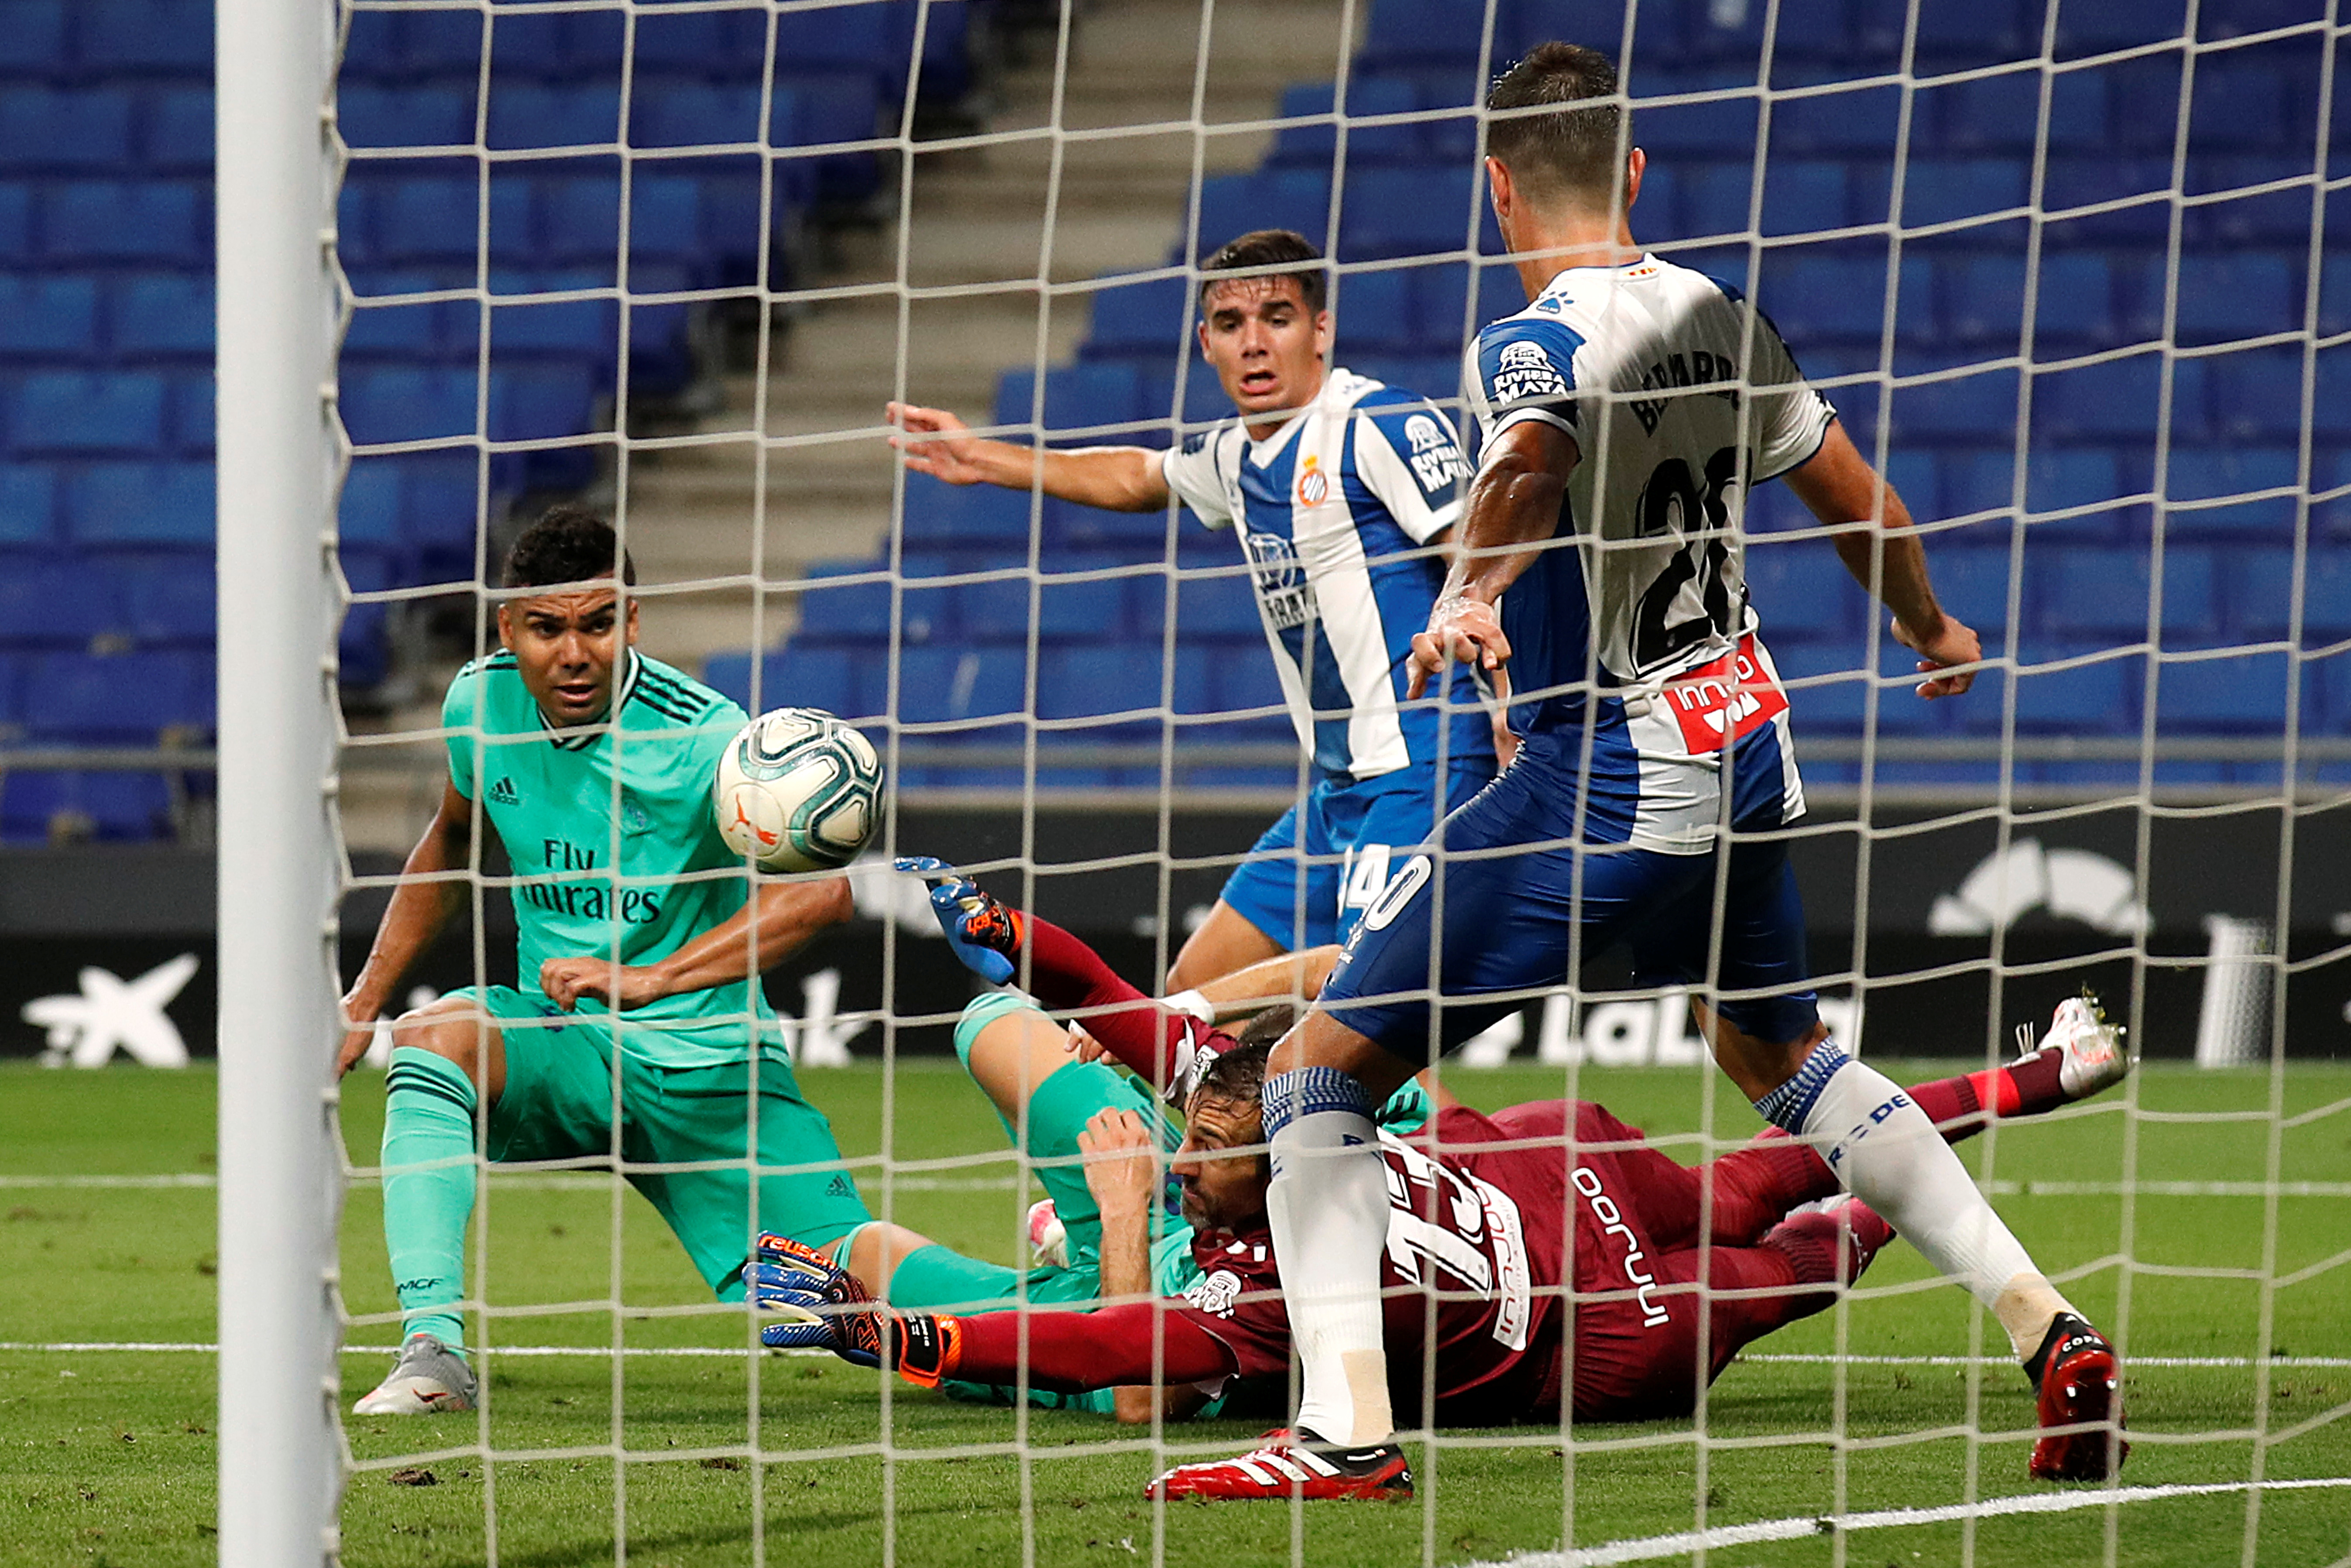 Espanyol's Diego Lopez in action with Real Madrid's Casemiro, as play resumes behind closed doors following the outbreak of the coronavirus disease (COVID-19) during the  La Liga Santander n match between Espanyol and Real Madrid, at RCDE Stadium, in Barcelona, Spain, on June 28, 2020. Photo: Reuters